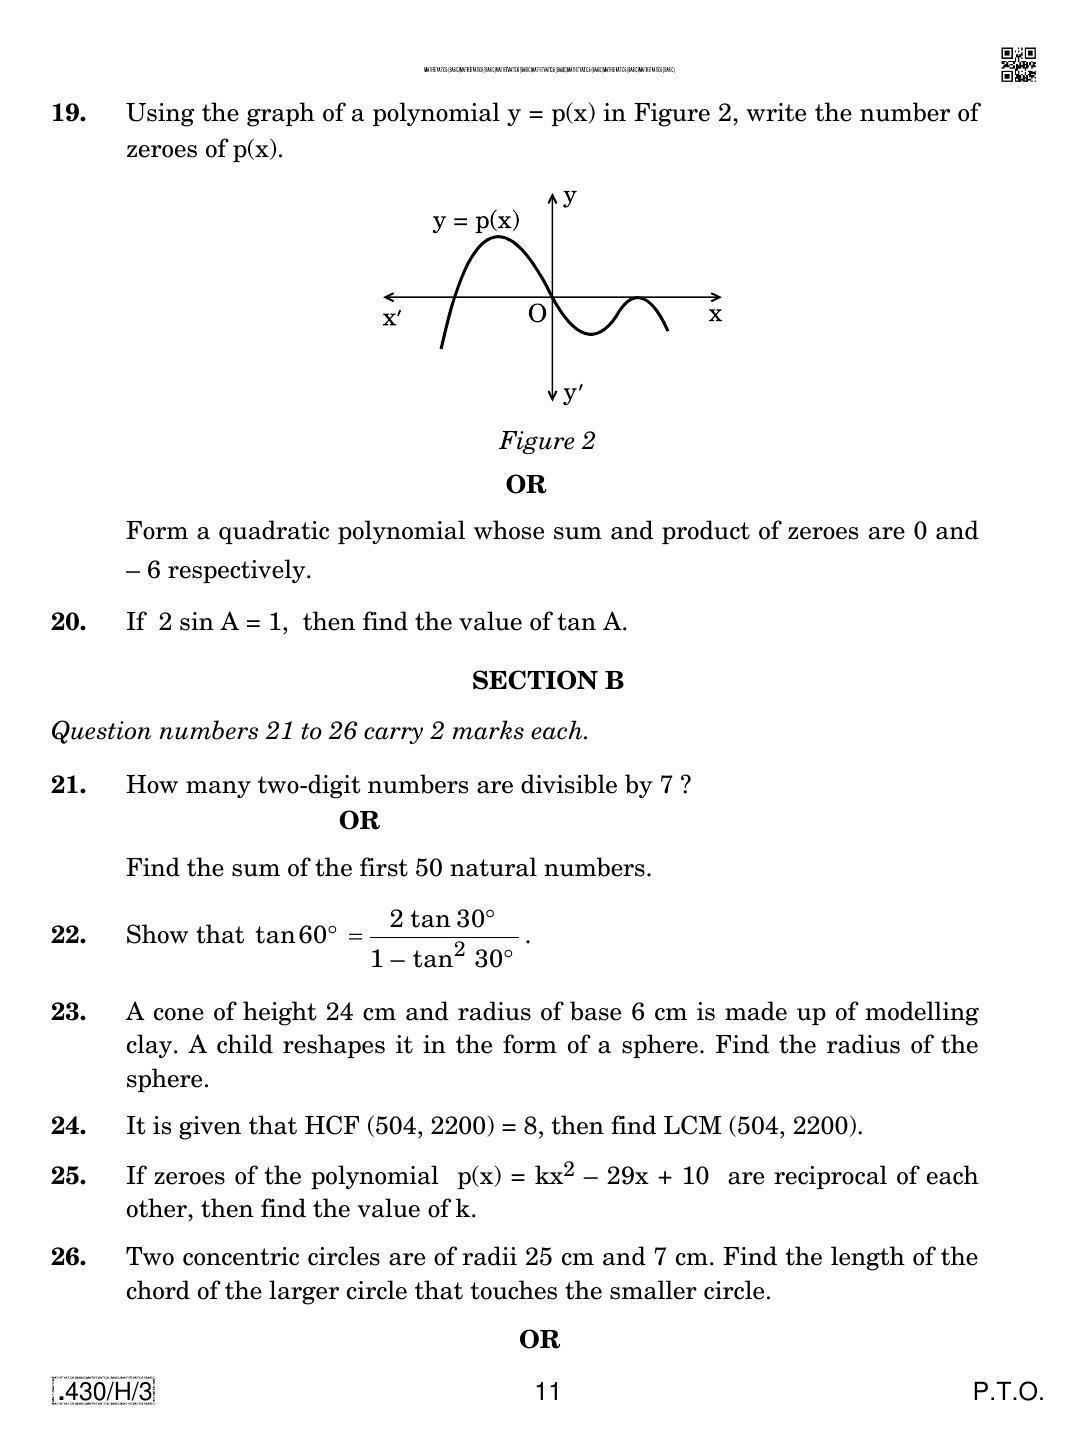 CBSE Class 10 430-C-3 - Maths (Basic) 2020 Compartment Question Paper - Page 11